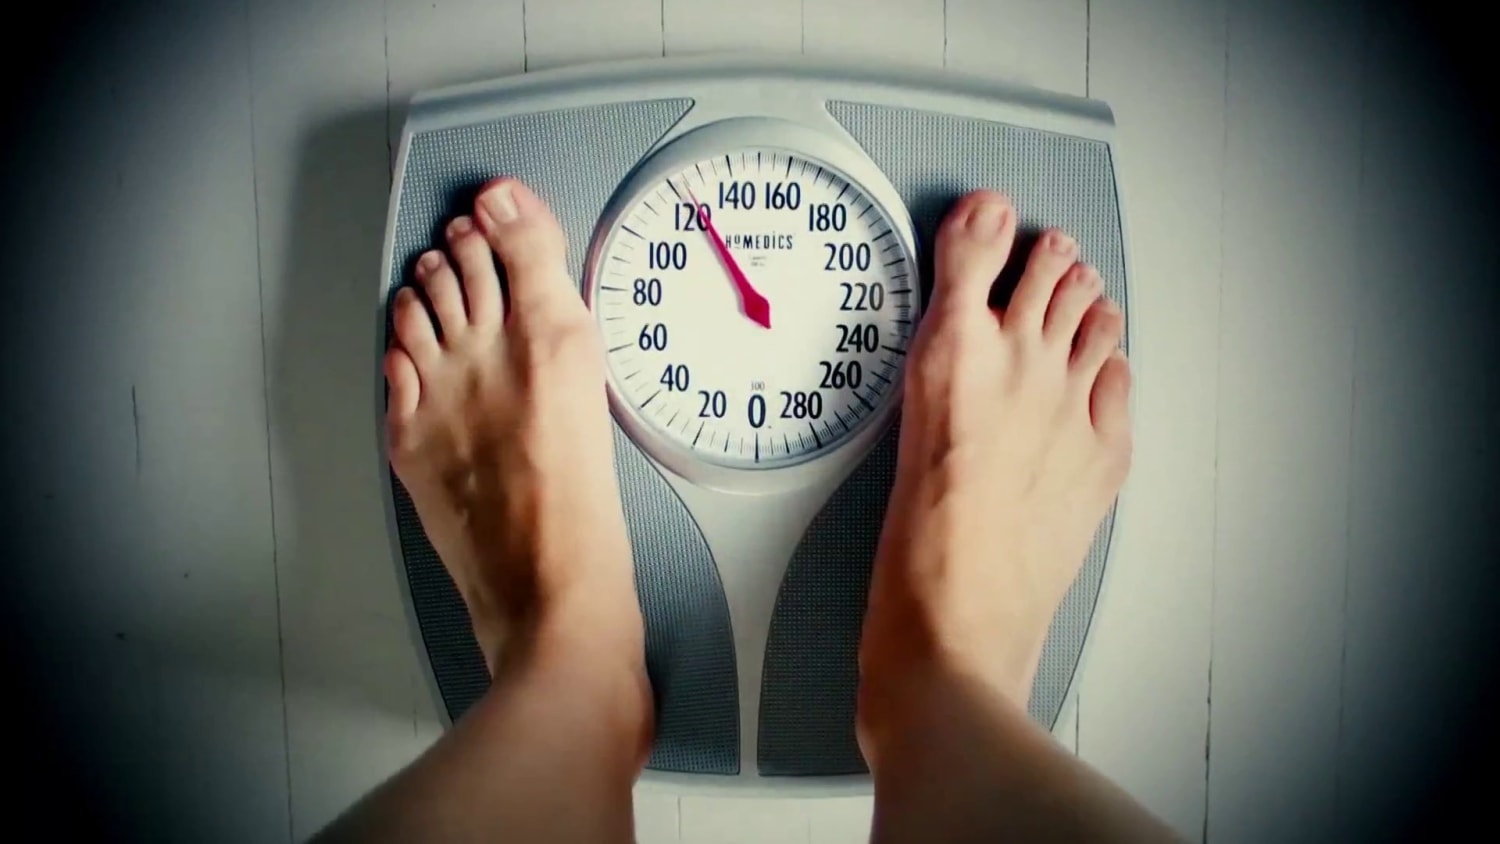 Body positivity movement rejected by health influencer on weight loss  journey: 'morbid obesity is not healthy